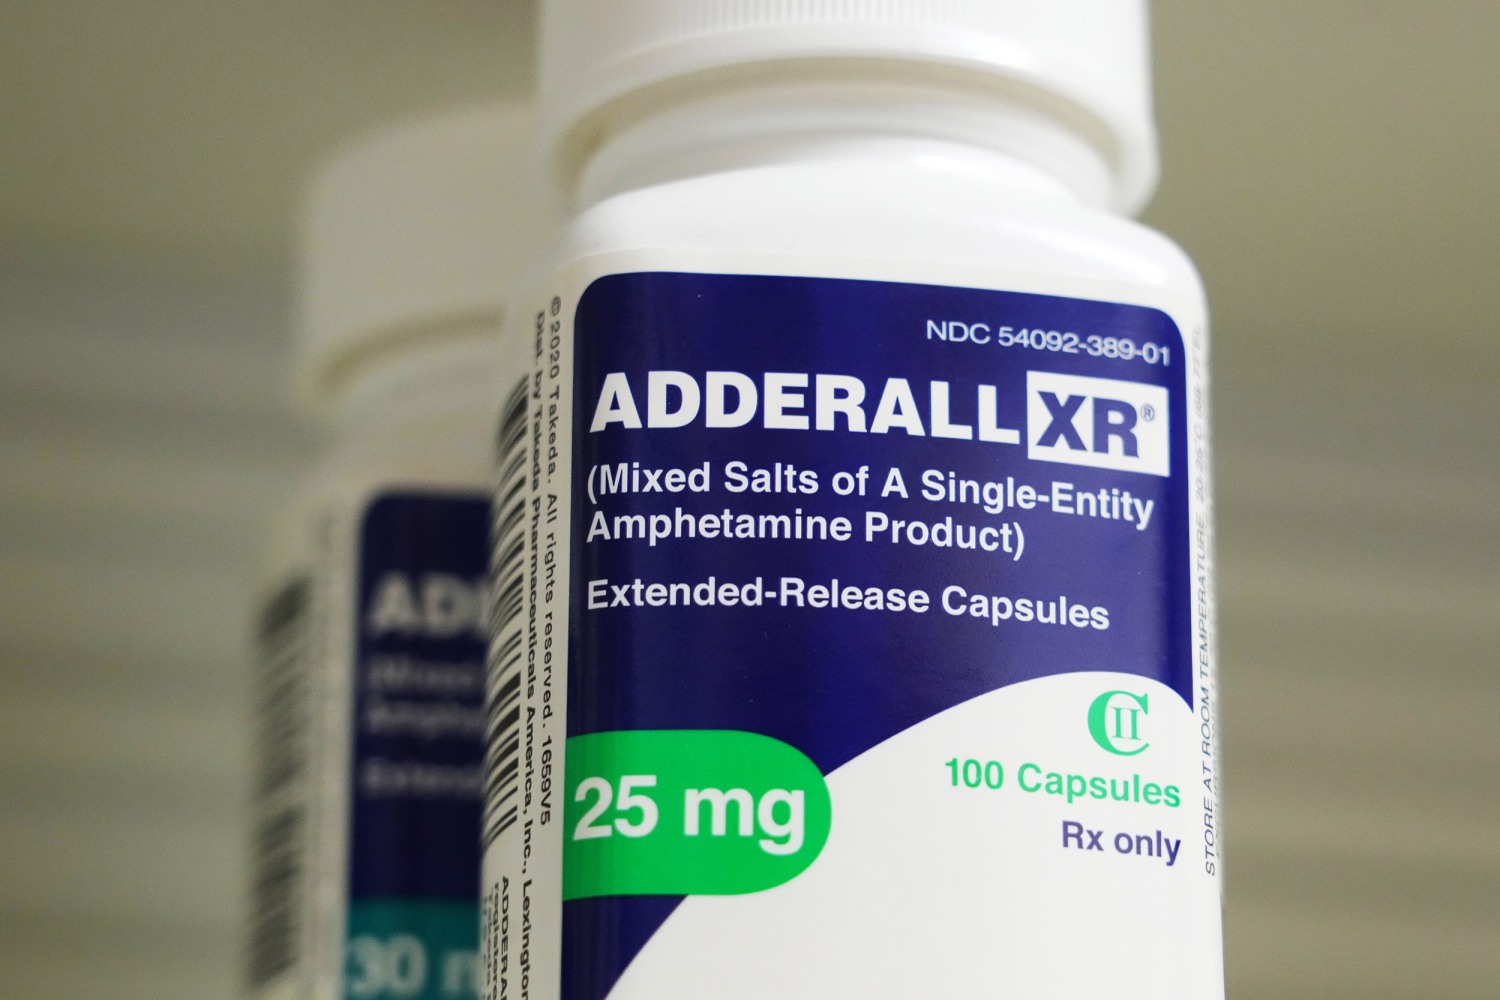 Modafinil Vs Adderall: Which Is More Effective For Focus And Concentration?